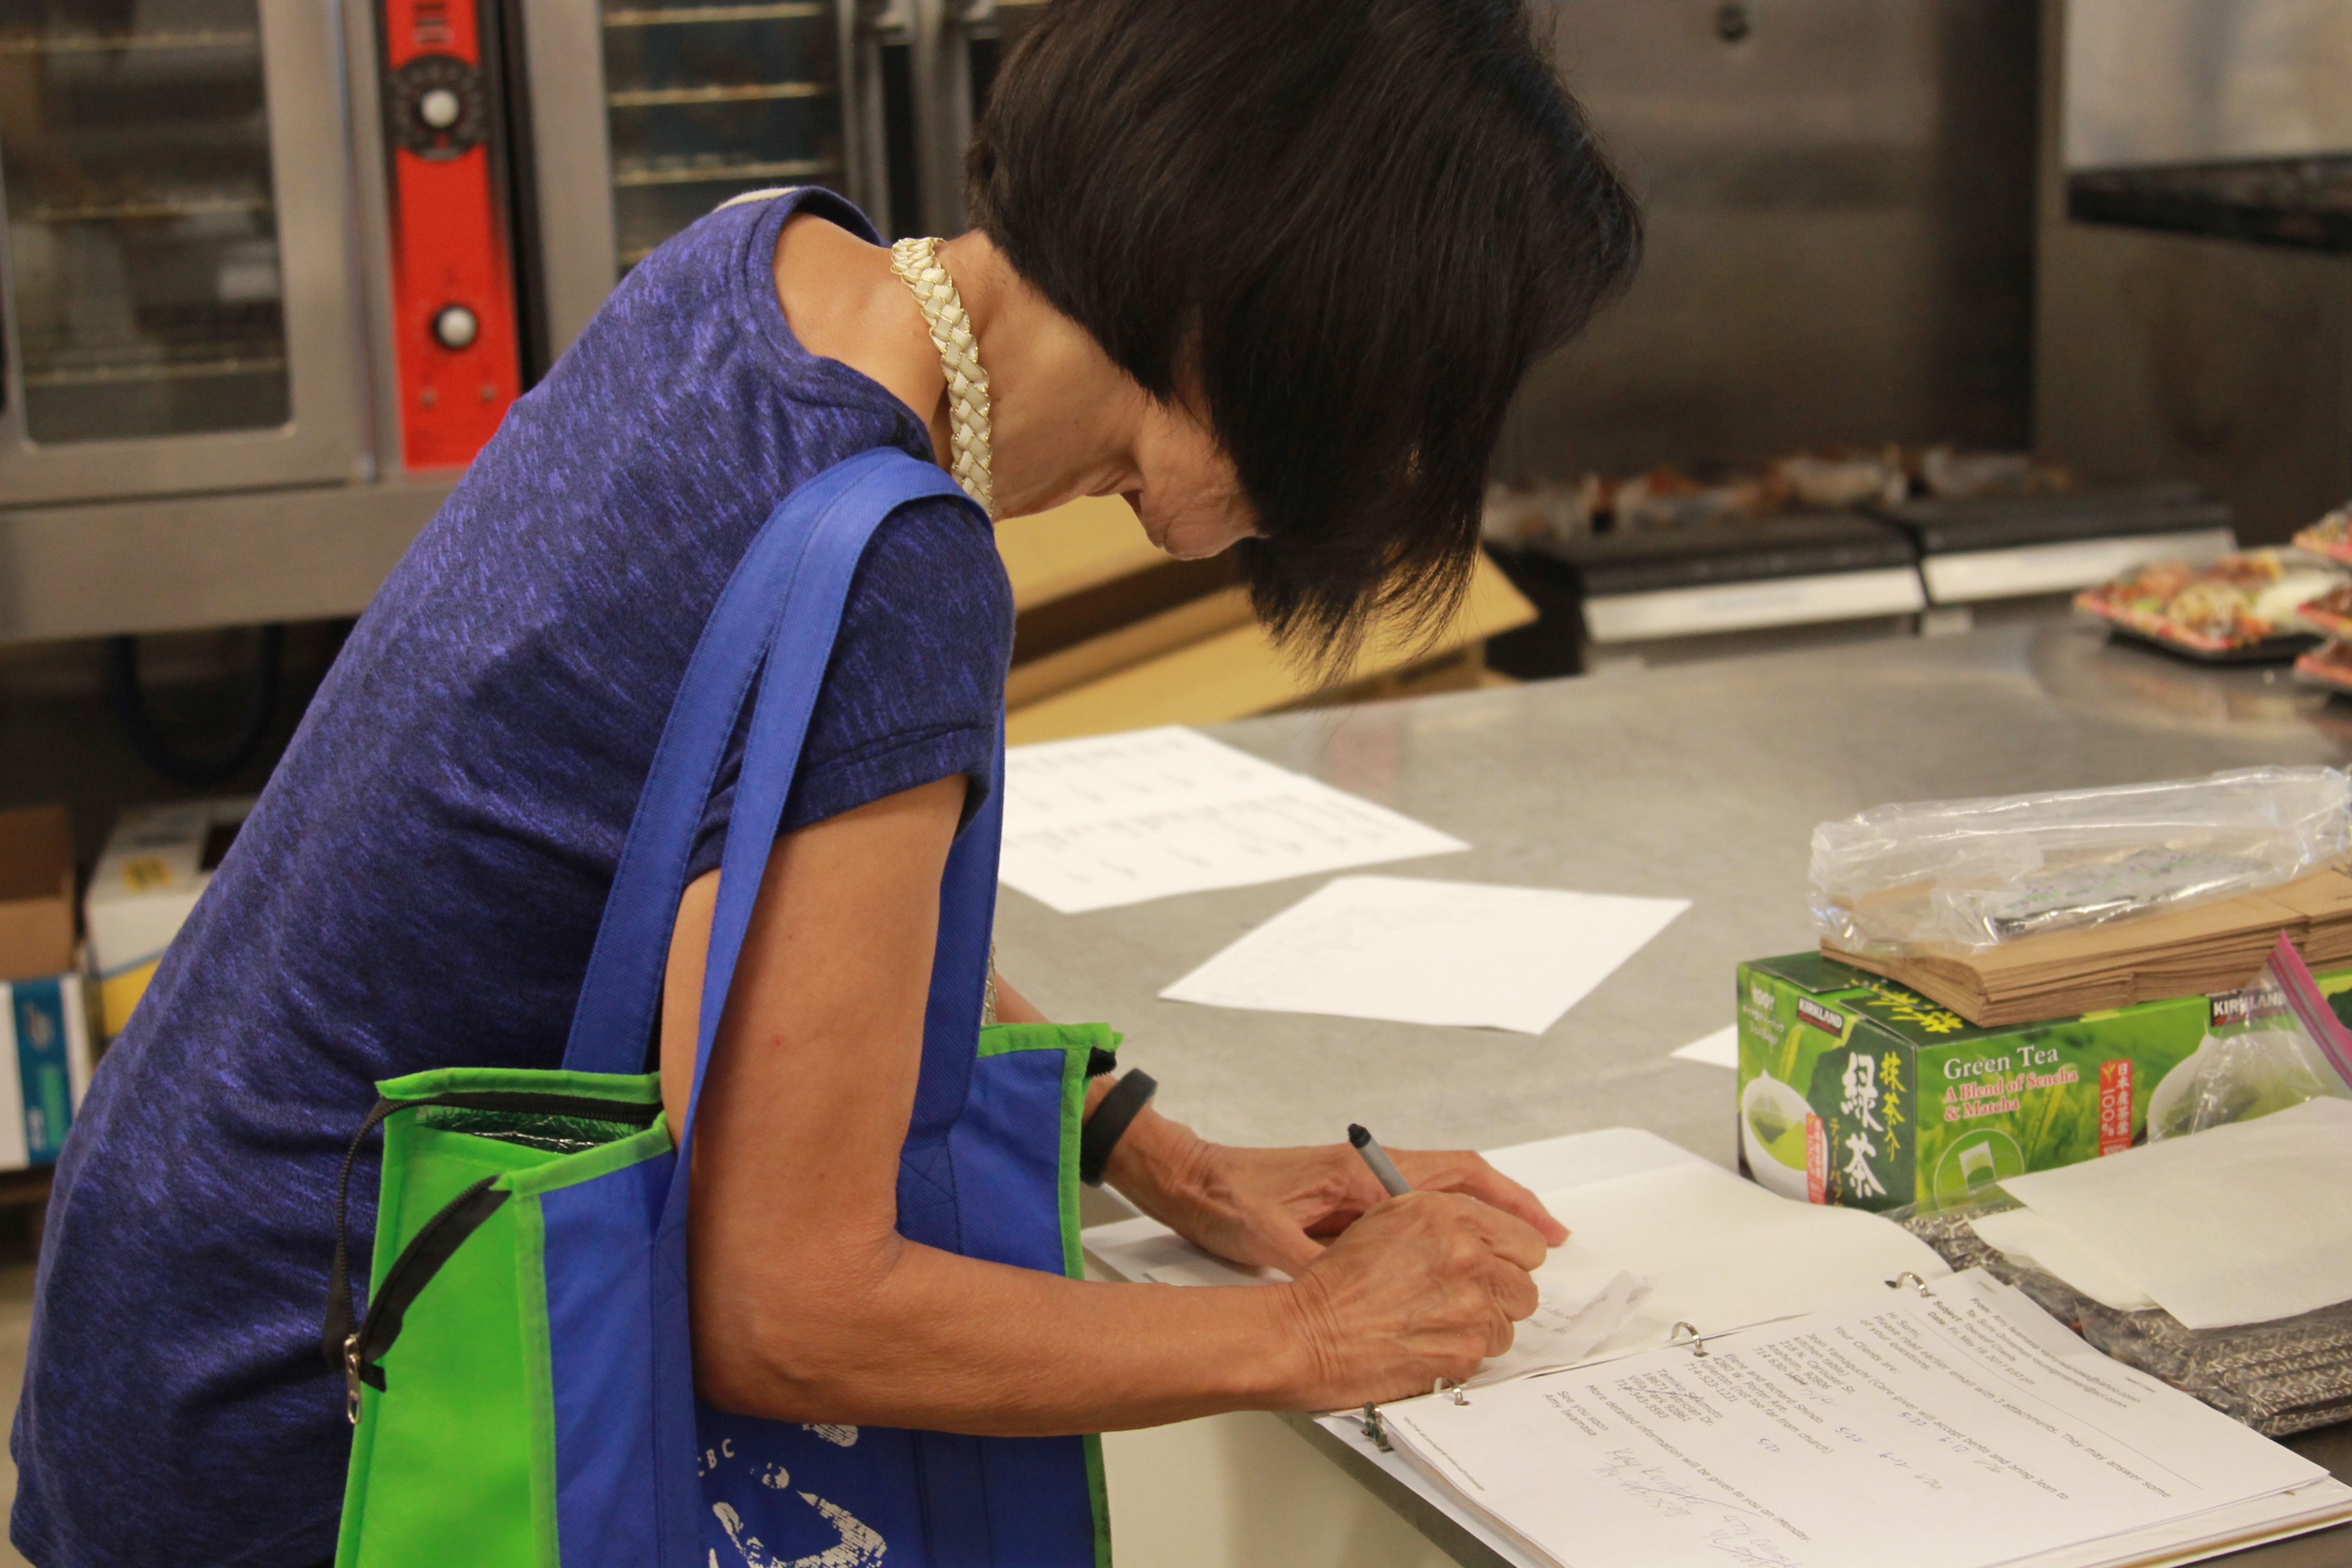 A volunteer filling out a form in a three-ring binder